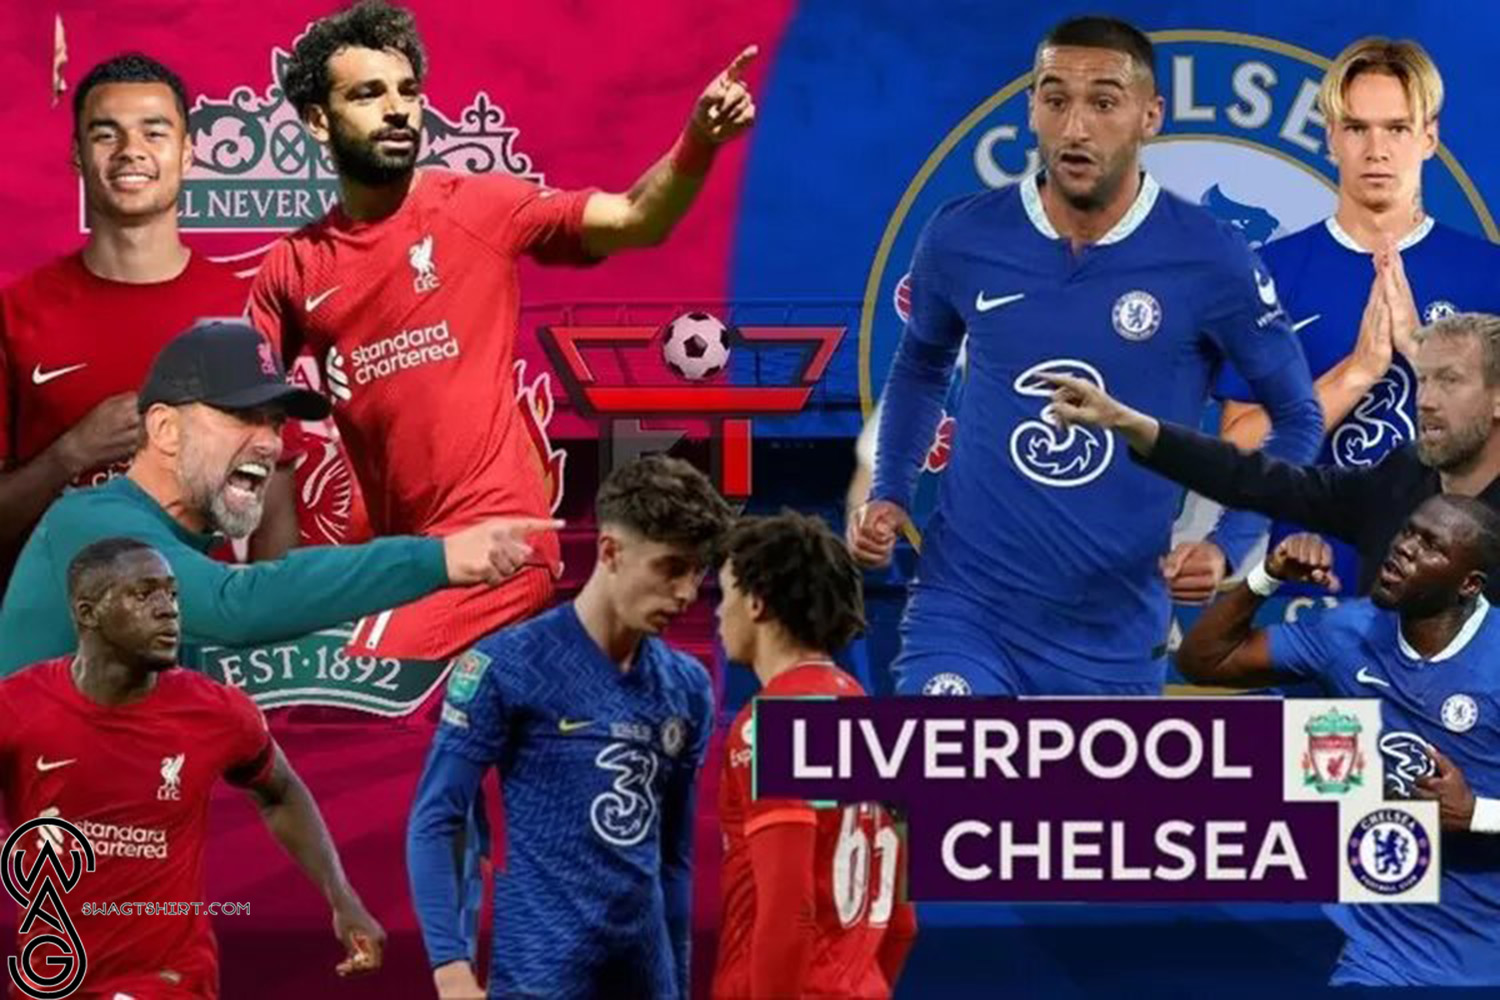 Premier League Thriller Liverpool vs Chelsea at Anfield - A Battle of Giants on January 31, 2024